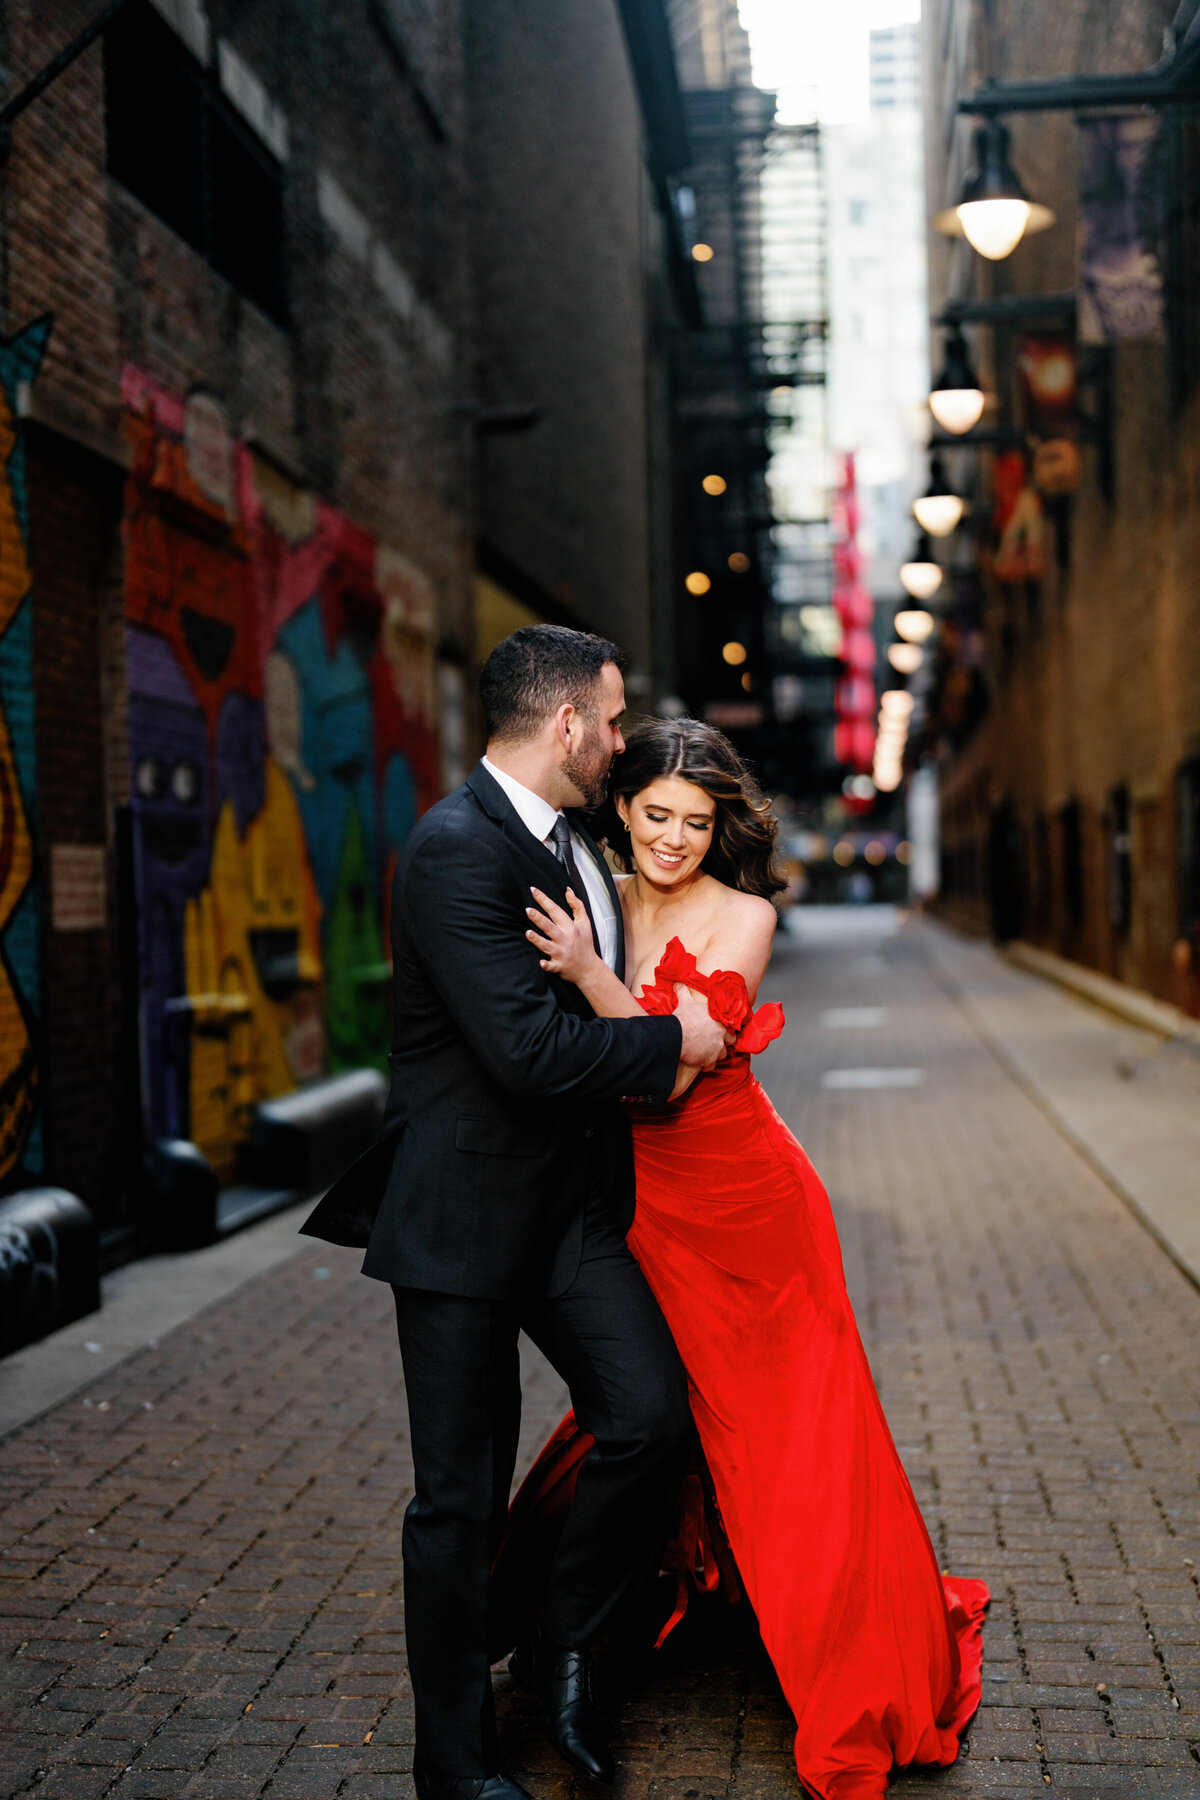 Aspen-Avenue-Chicago-Wedding-Photographer-Union-Station-Chicago-Theater-Engagement-Session-Timeless-Romantic-Red-Dress-Editorial-Stemming-From-Love-Bry-Jean-Artistry-The-Bridal-Collective-True-to-color-Luxury-FAV-99